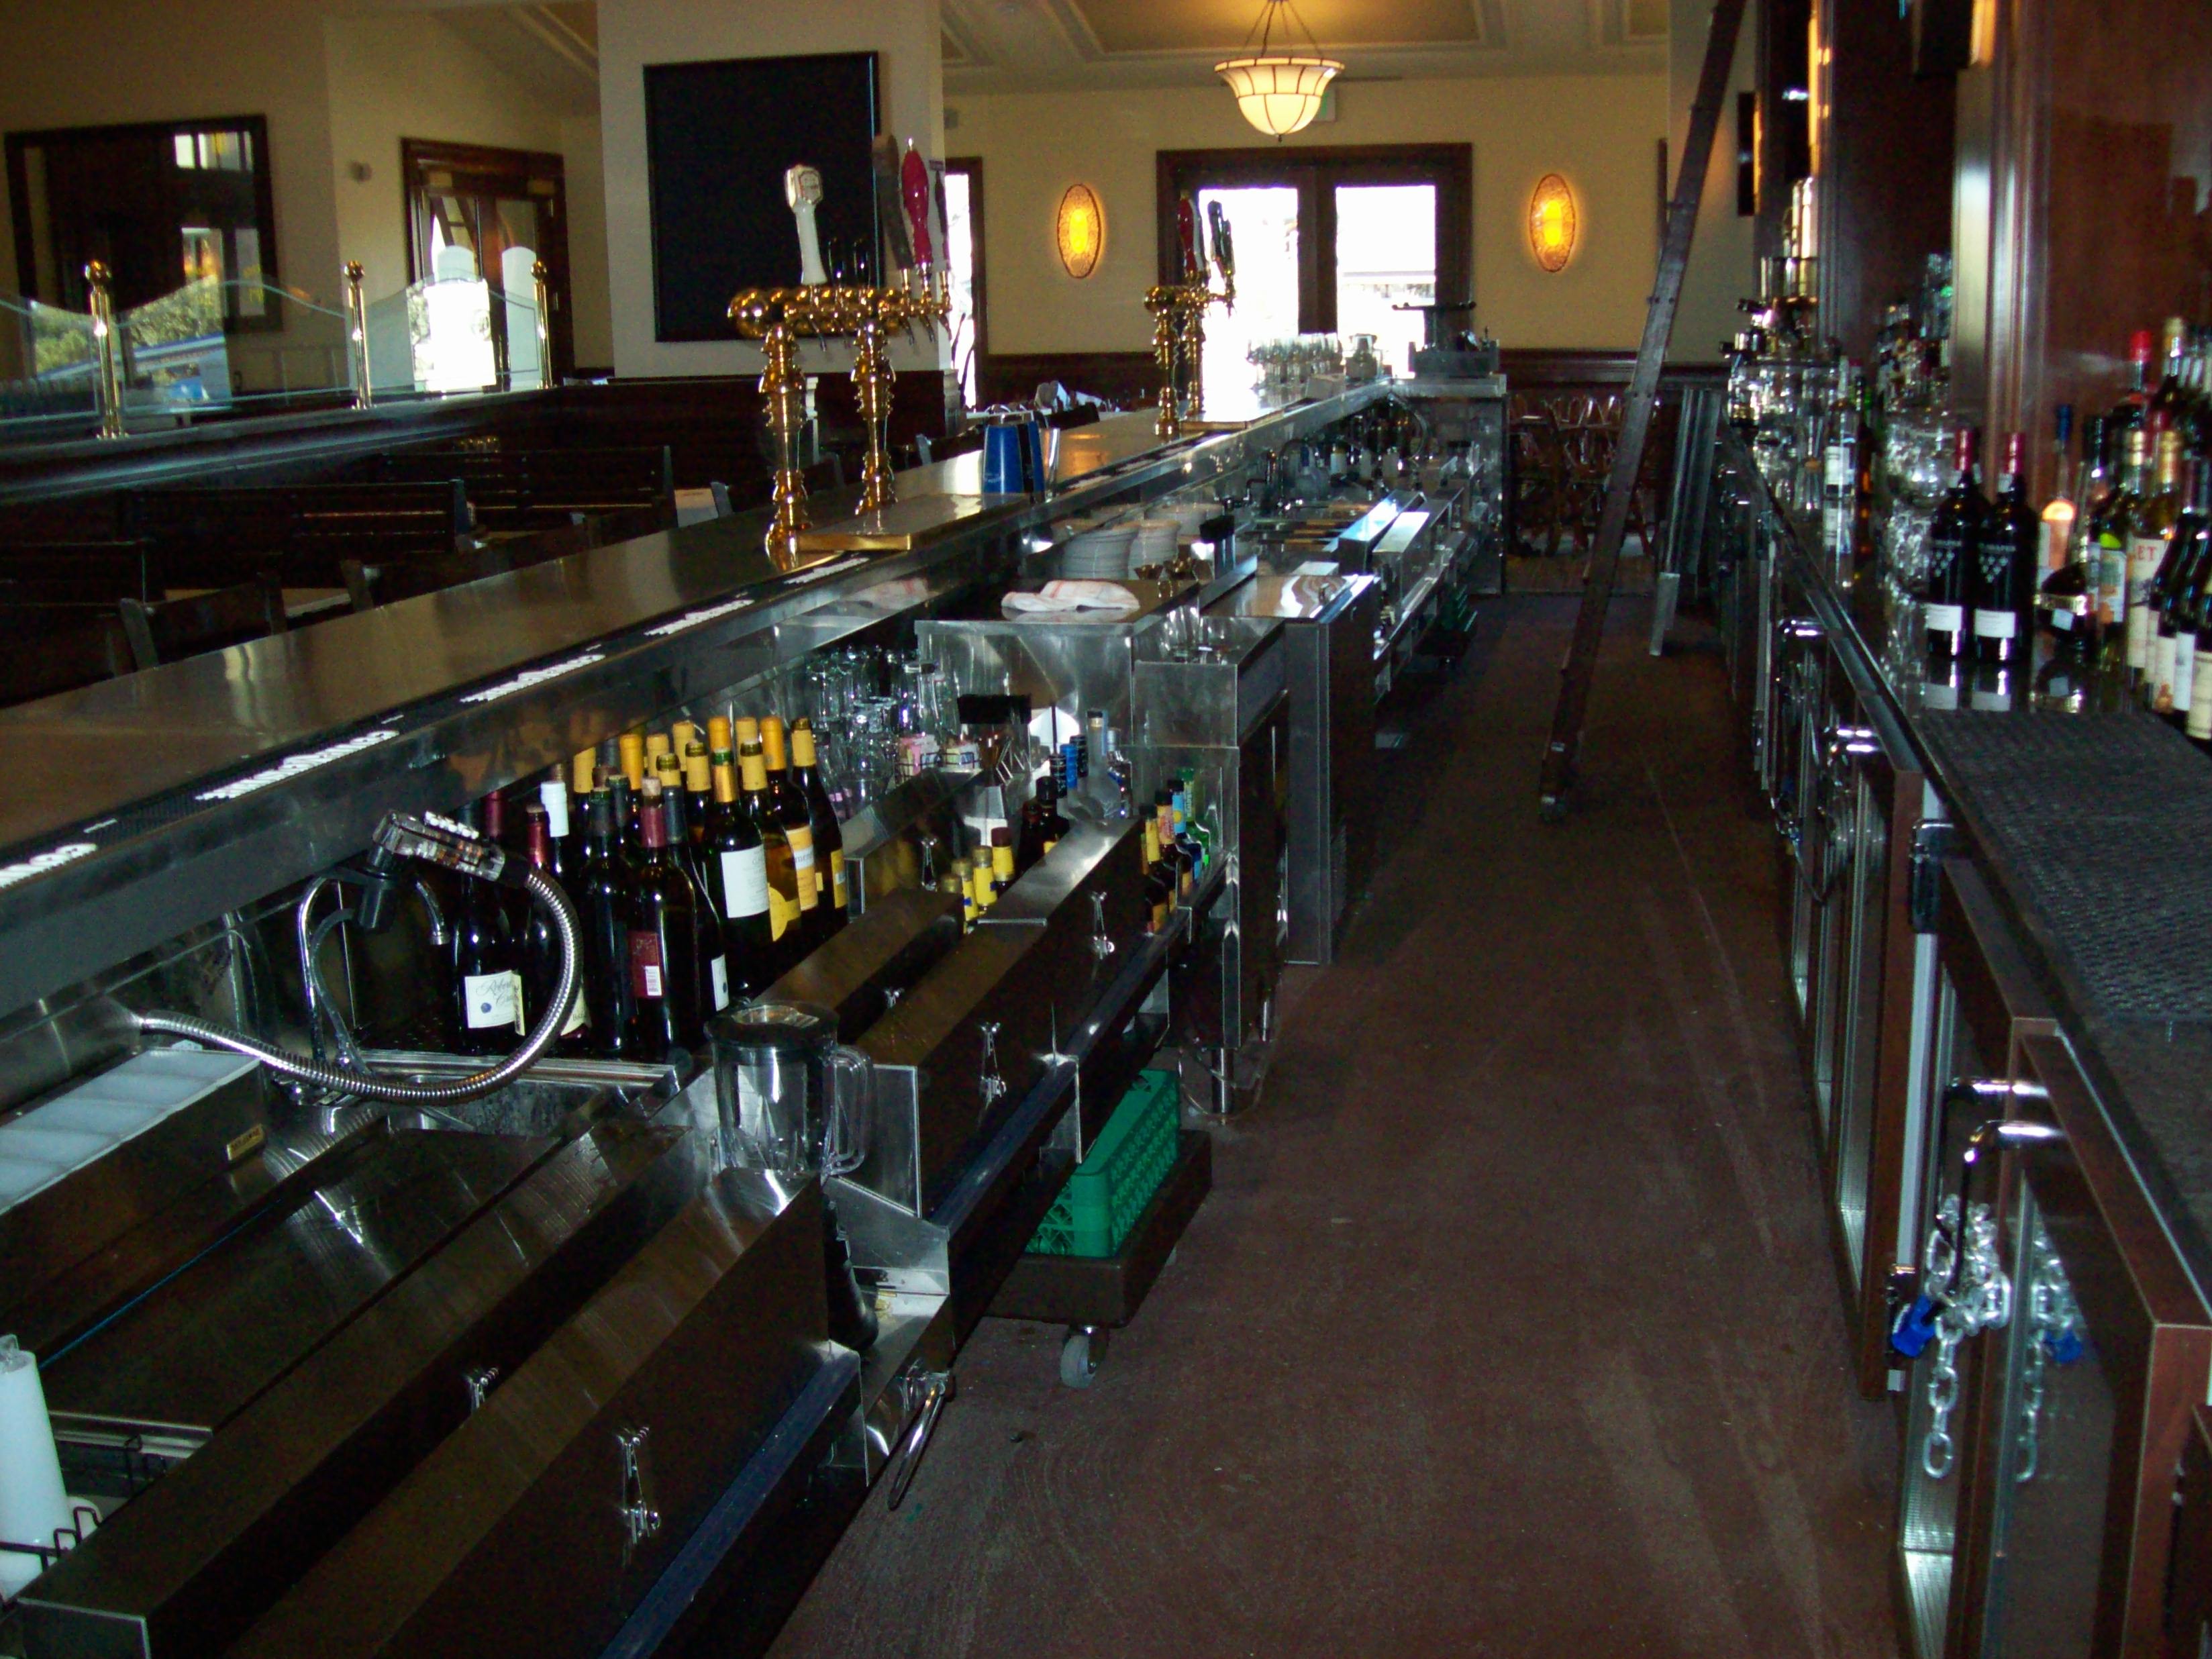 Remote Refrigerated Beer Systems